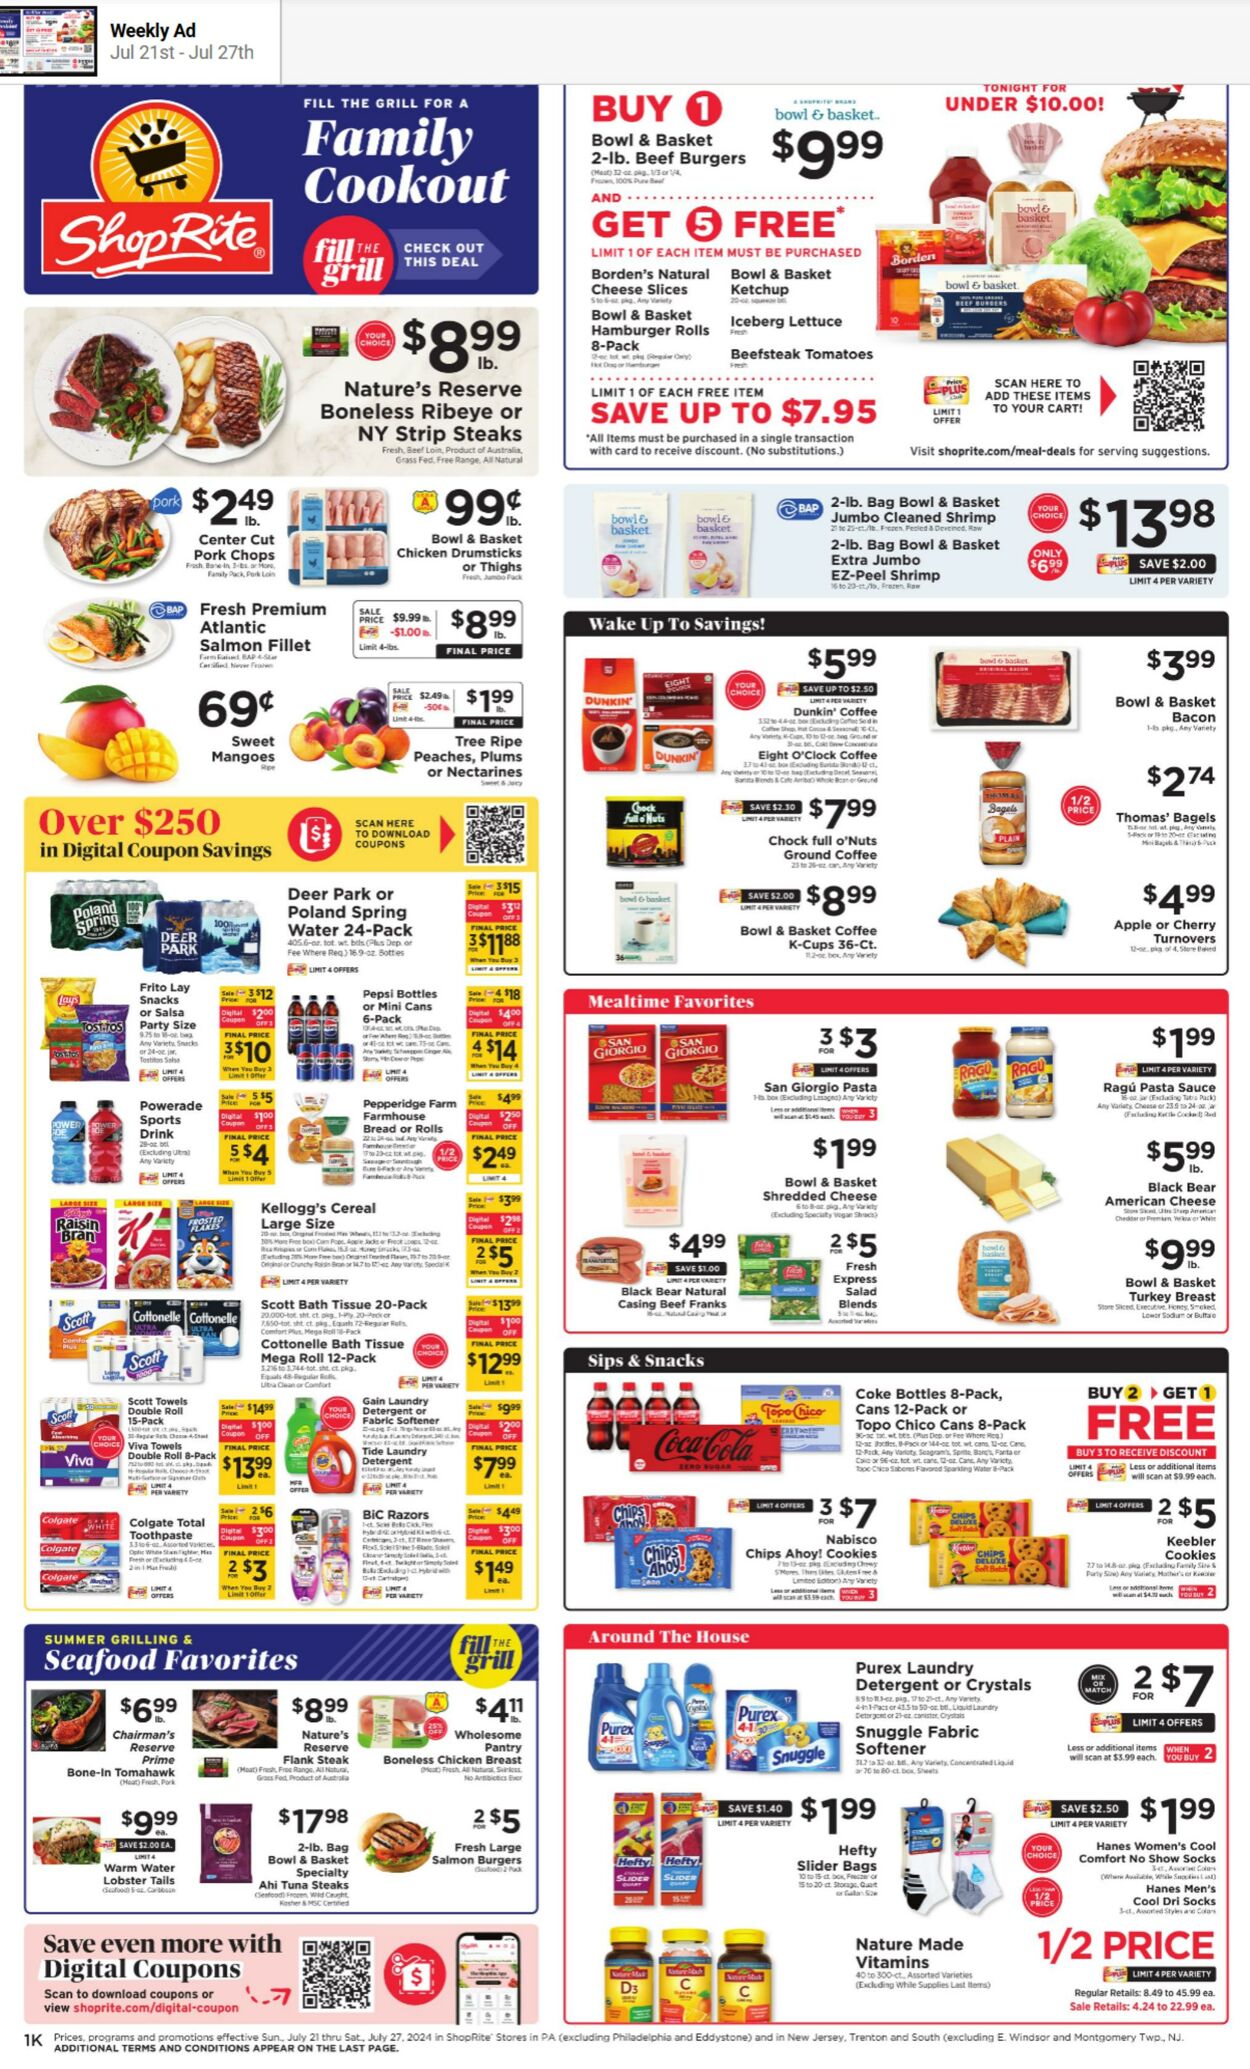 ShopRite Promotional weekly ads